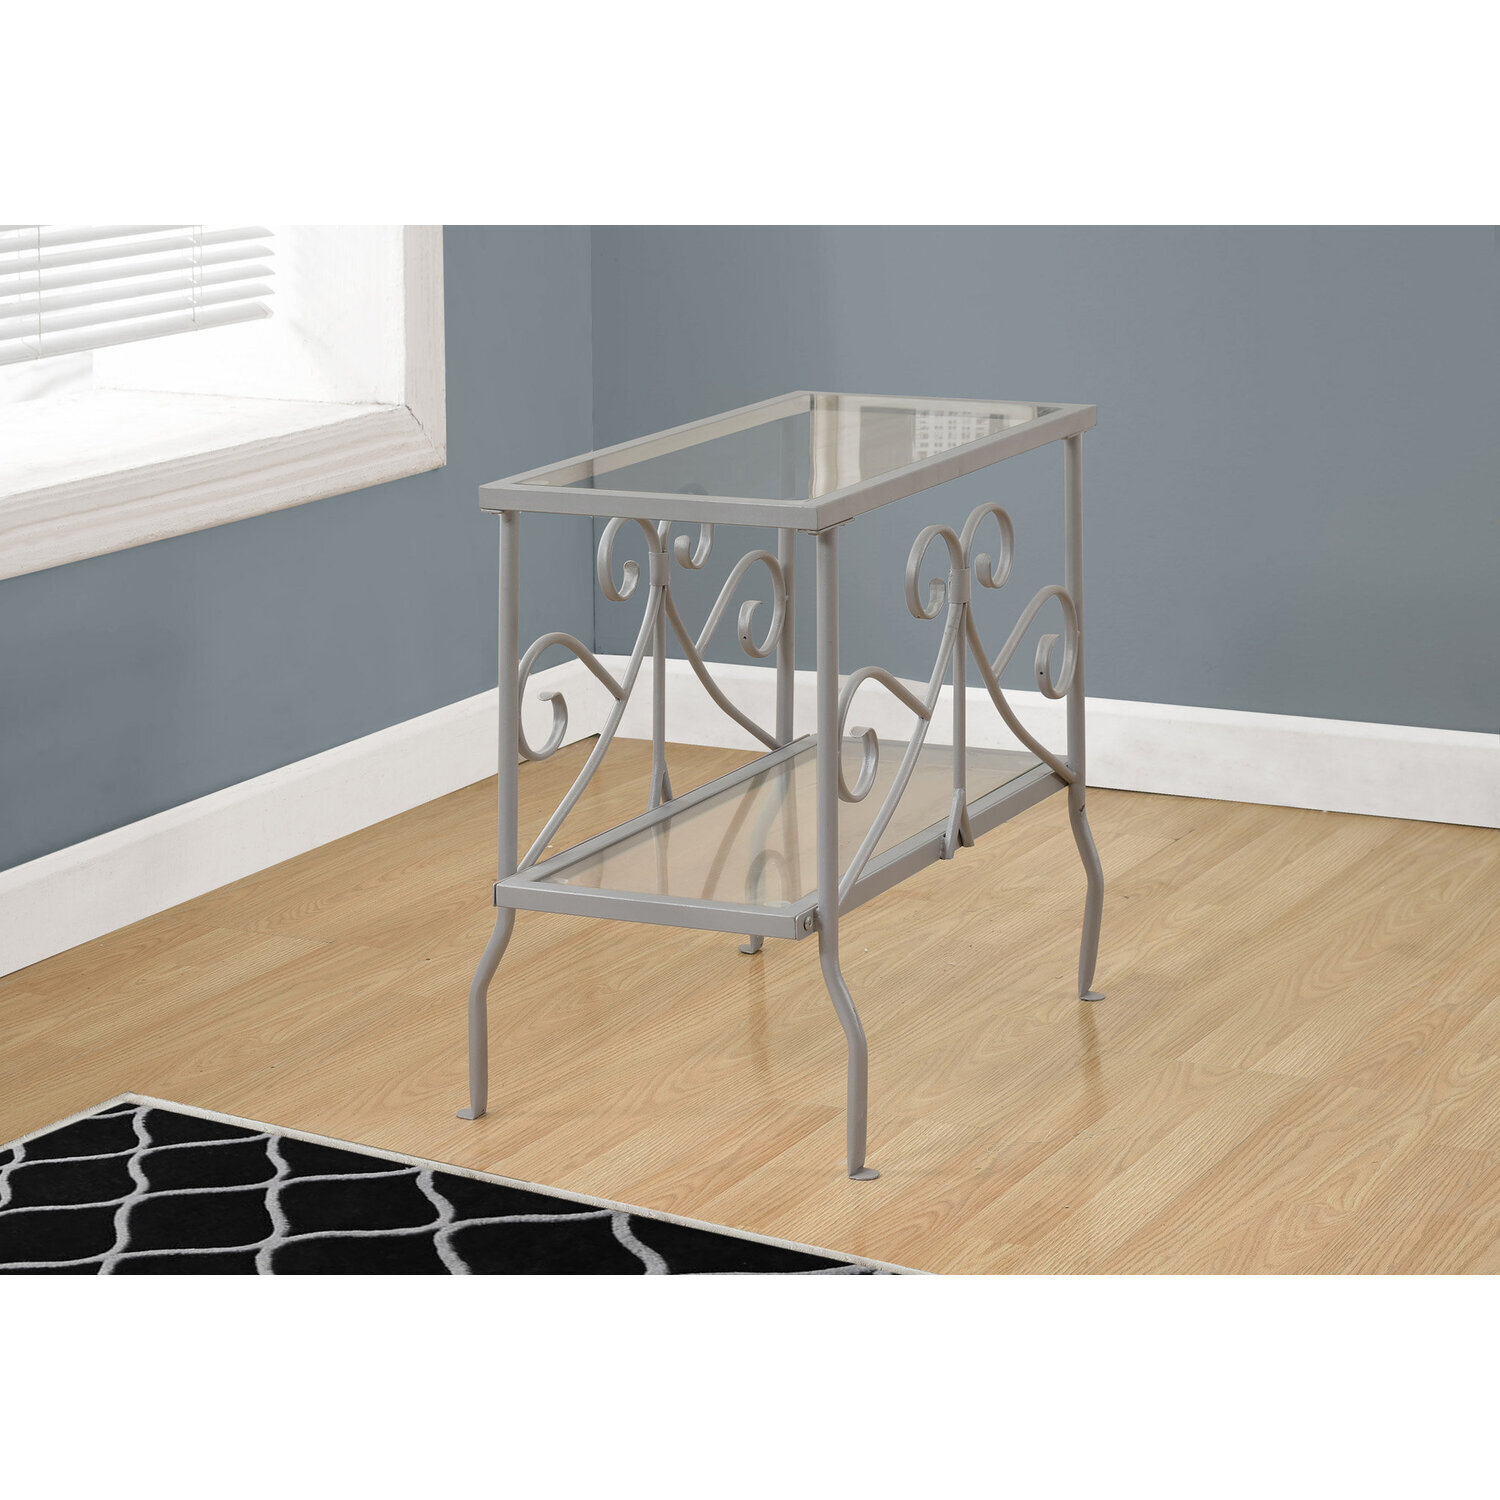 ACCENT TABLE - SILVER METAL WITH TEMPERED GLASS